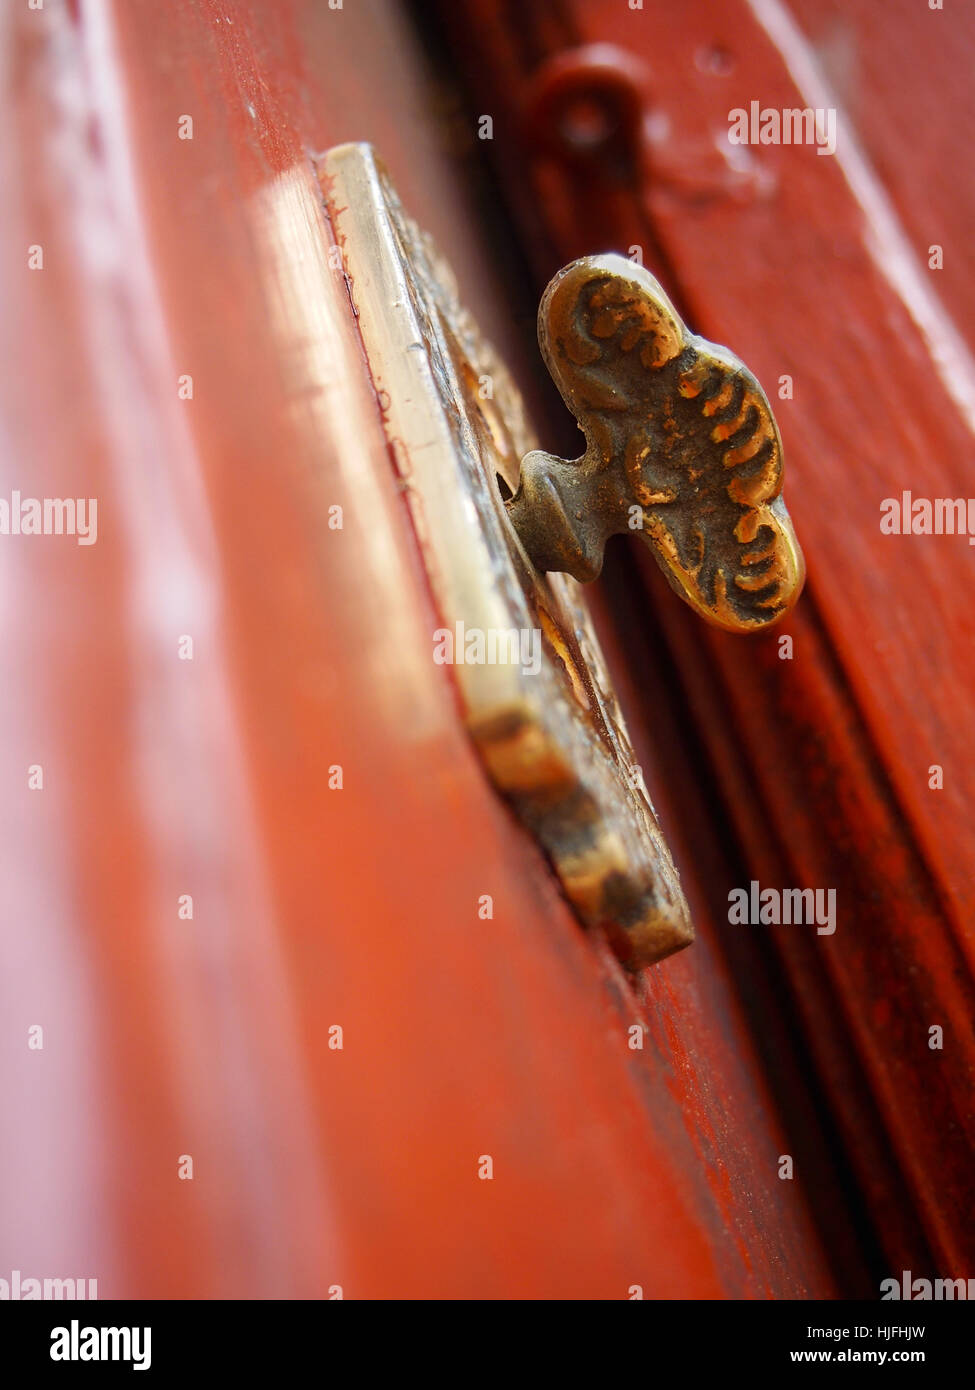 Extreme closeup of a fancy antique brass doorknob on an old red door. Stock Photo